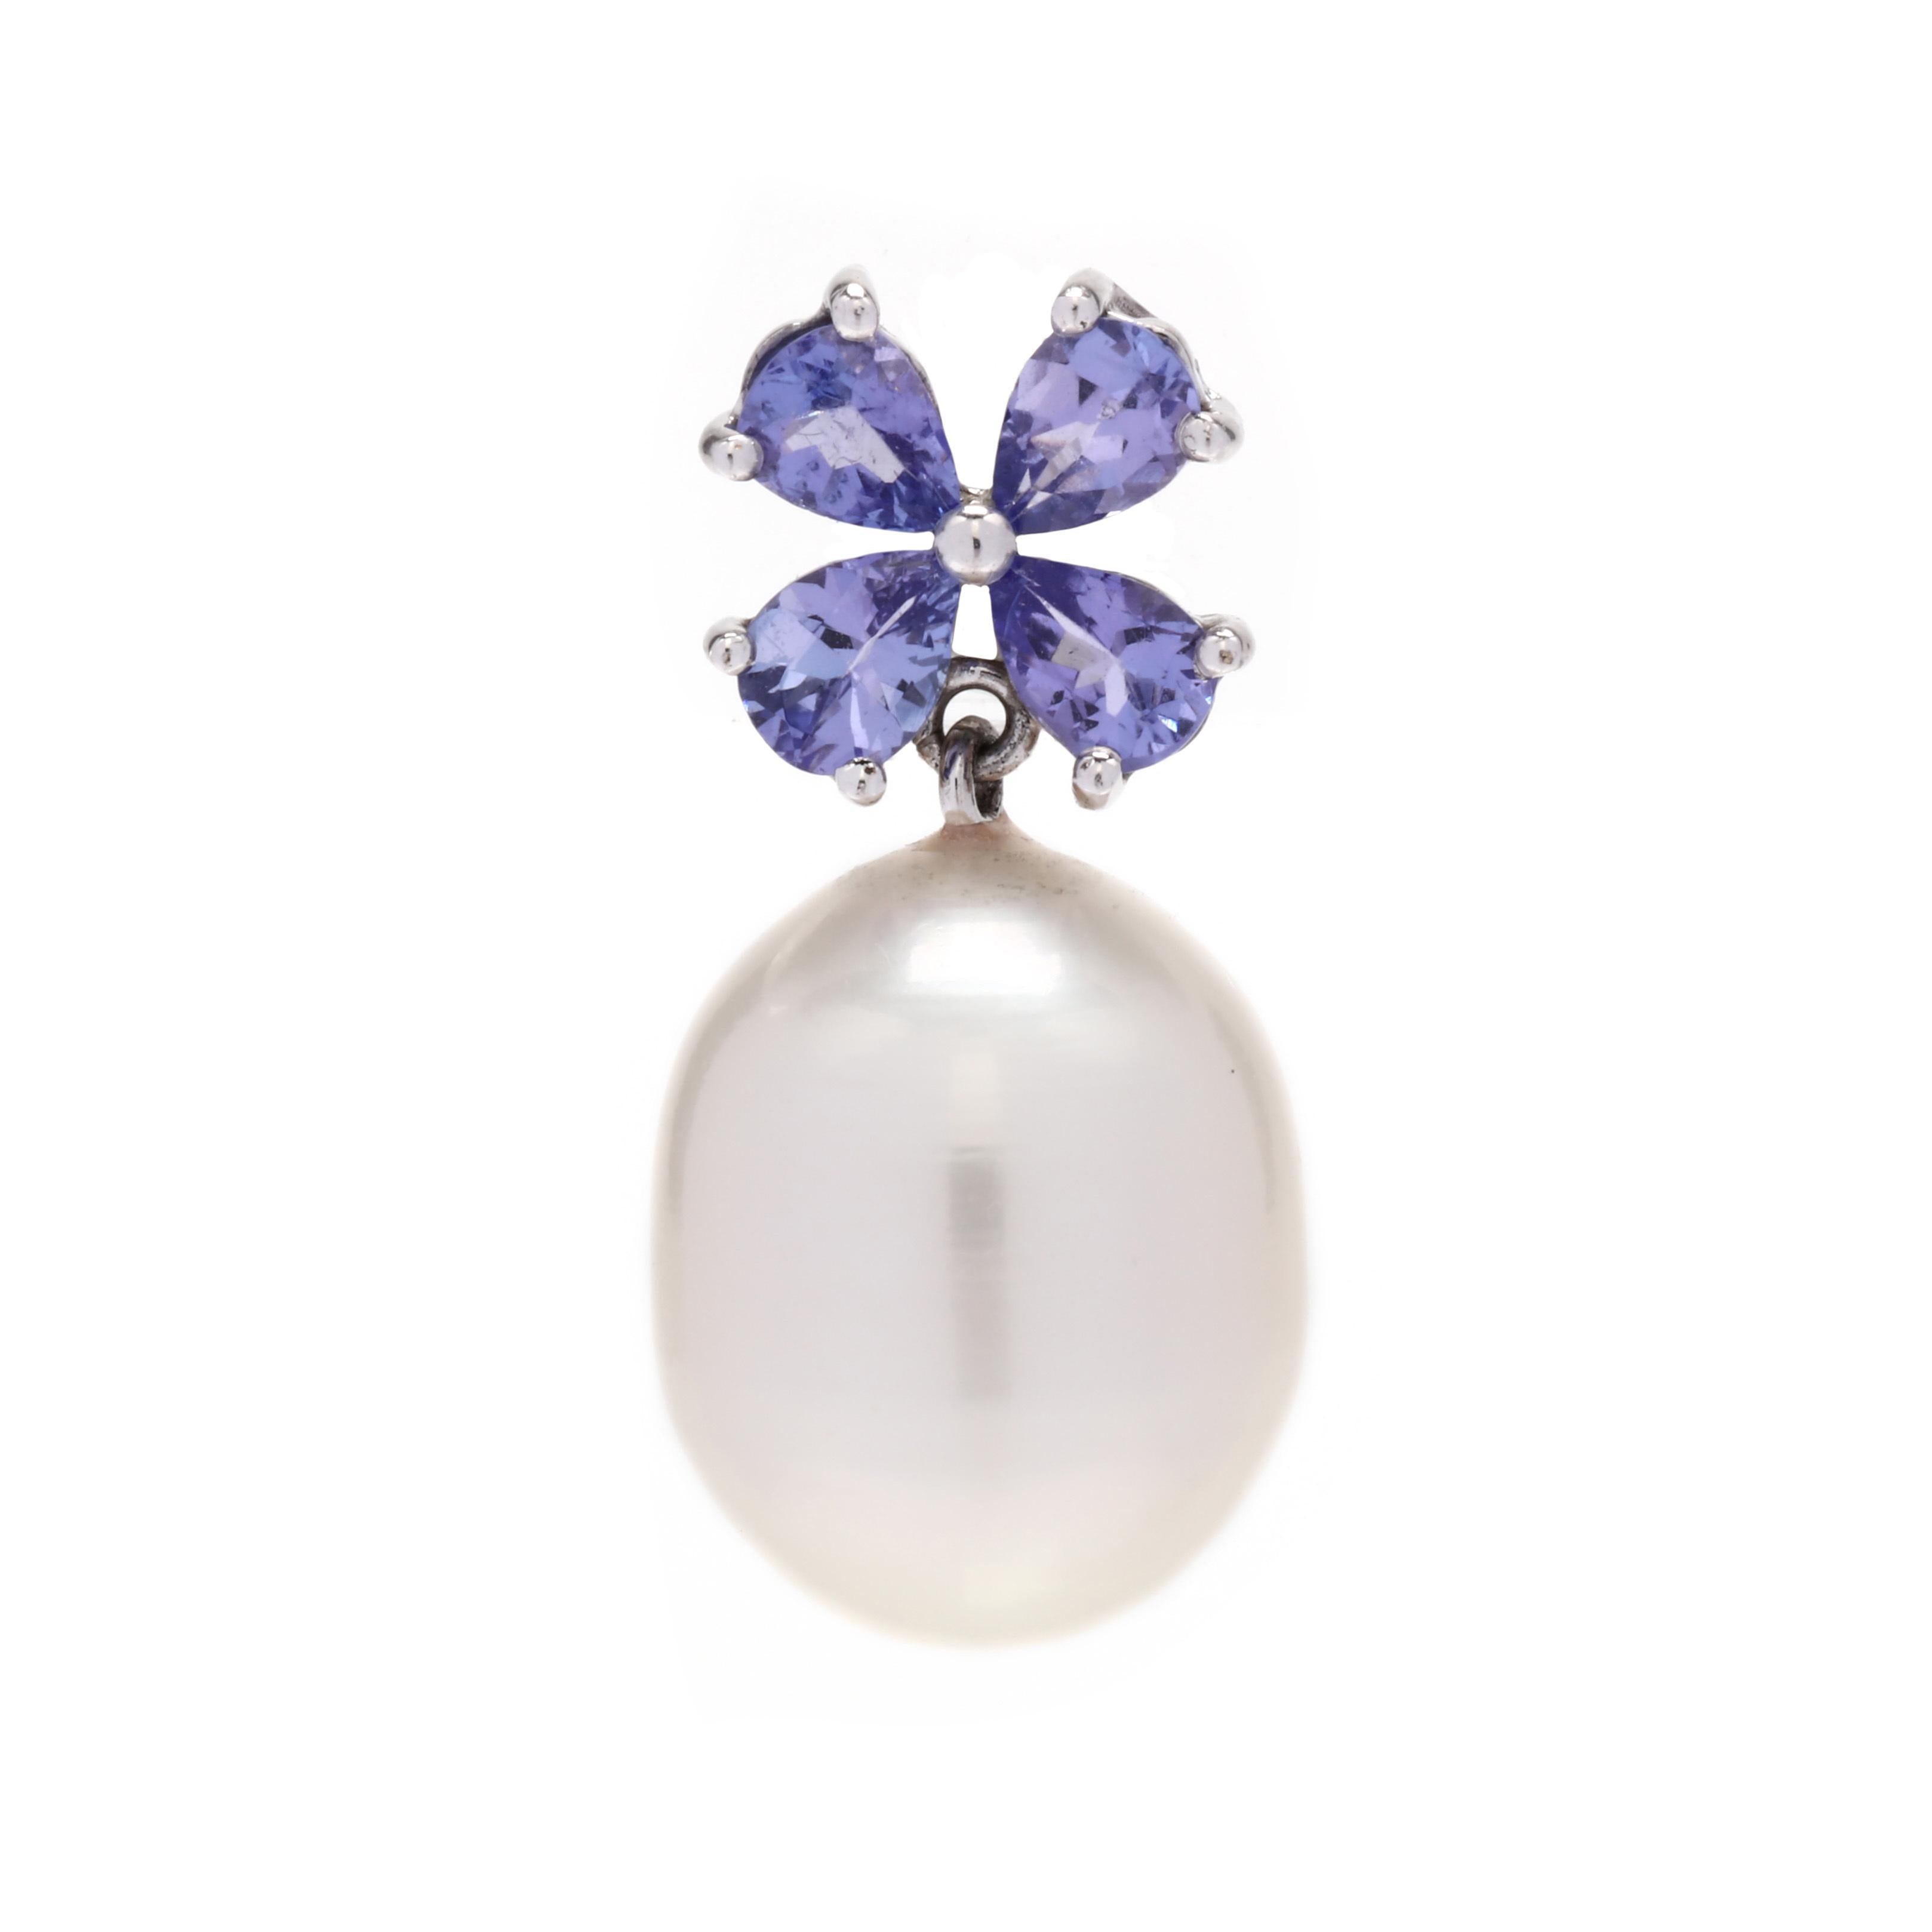 A pair of 14 karat white gold tanzanite and pearl drop earrings. These earrings feature a cluster of pear shape tanzanites weighing approximately 1.28 total carats in a floral motif with an oblong pearl drop and pierced butterfly push